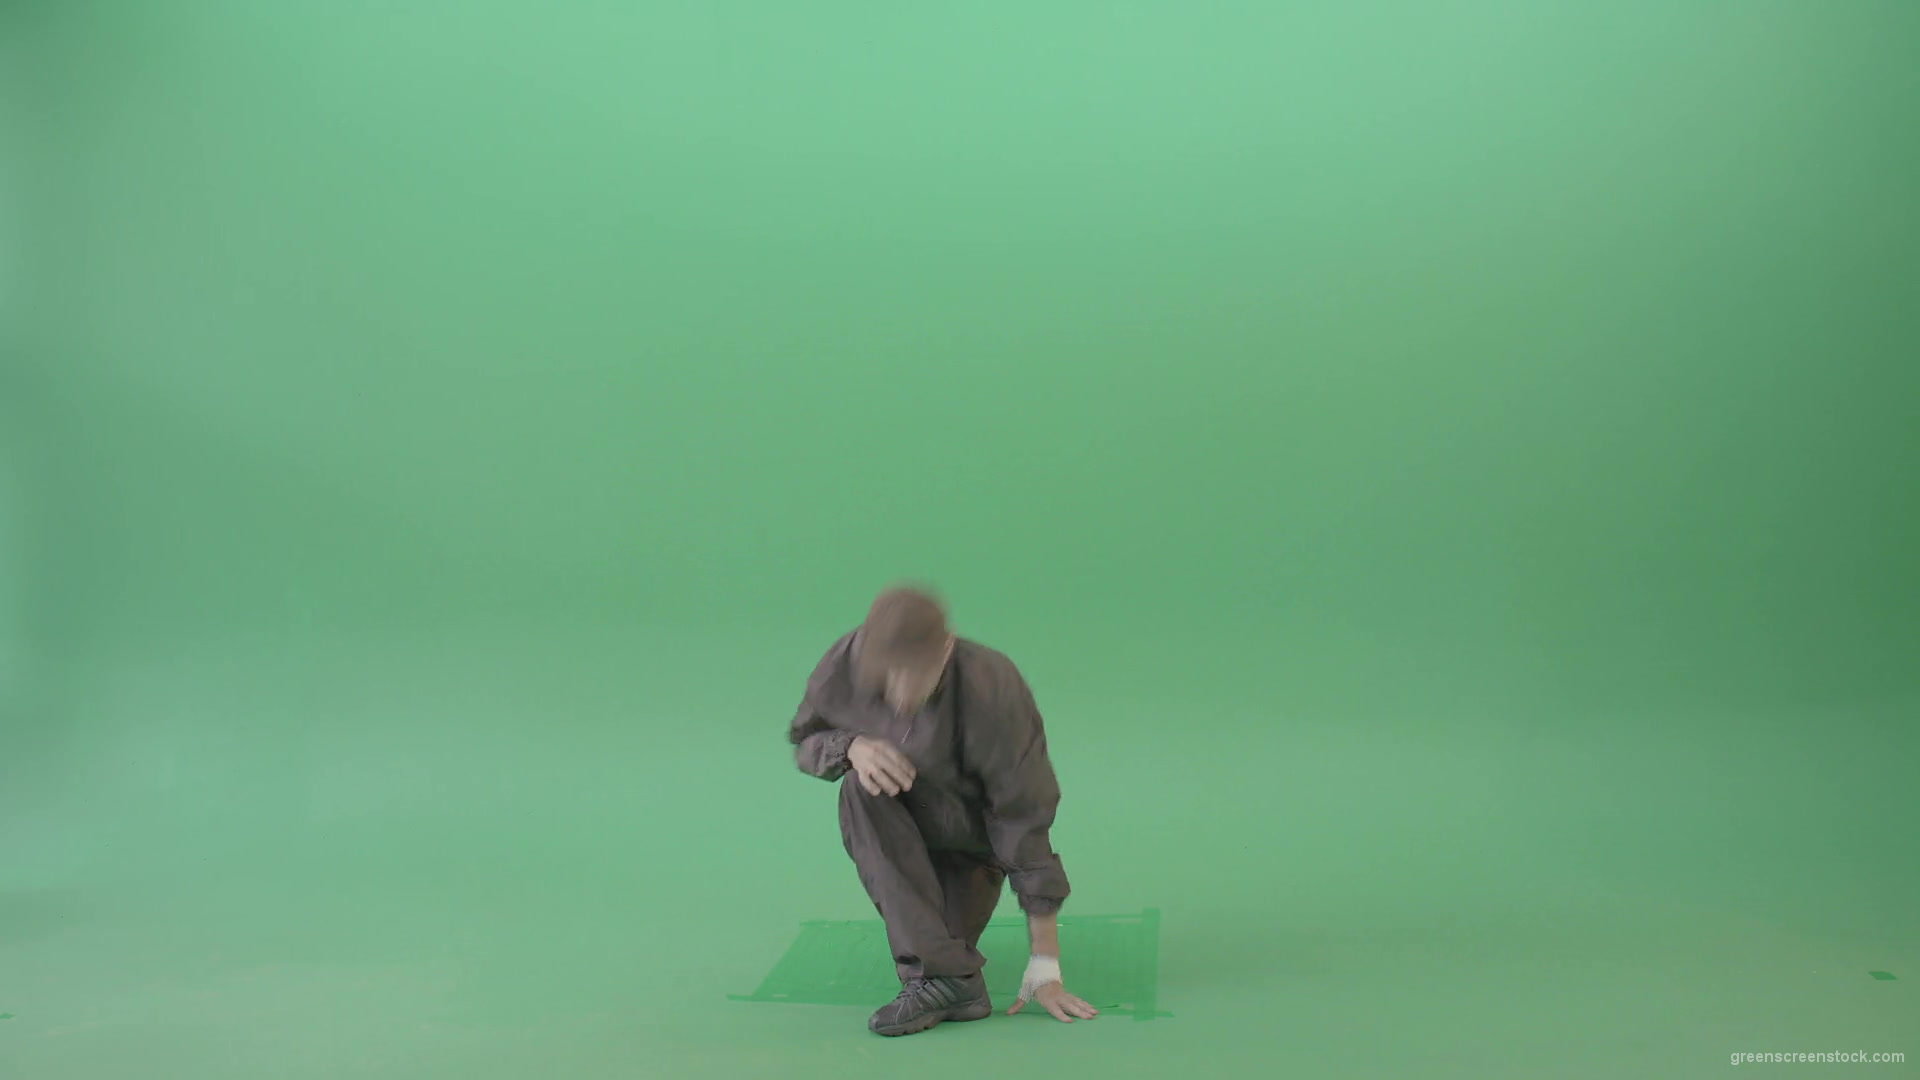 Breakadance-Man-making-dynamic-power-move-element-spinning-on-hand-over-green-screen-4K-Video-Footage-1920_008 Green Screen Stock